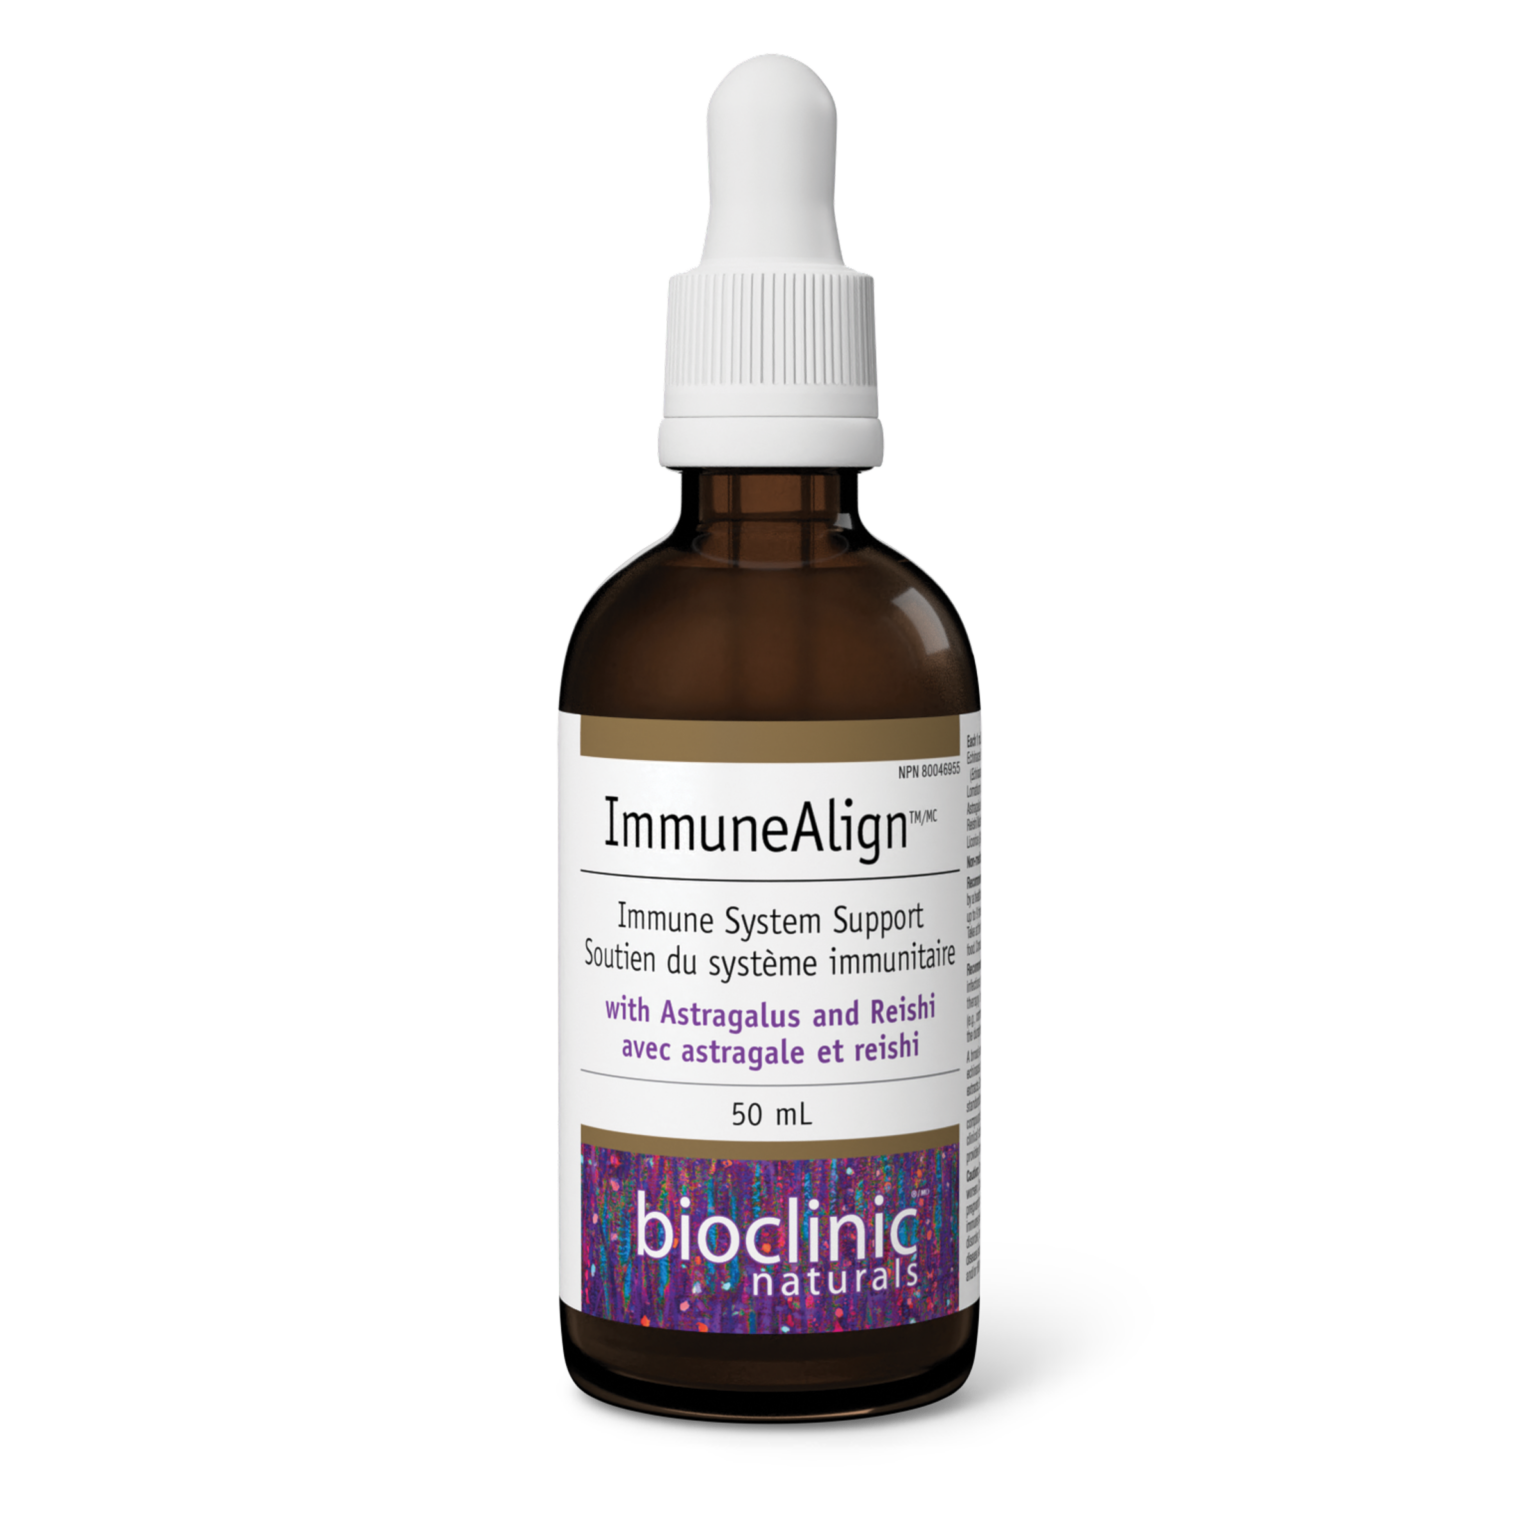 BioClinic Naturals ImmuneAlign (50mL) with Astragalus and Reishi